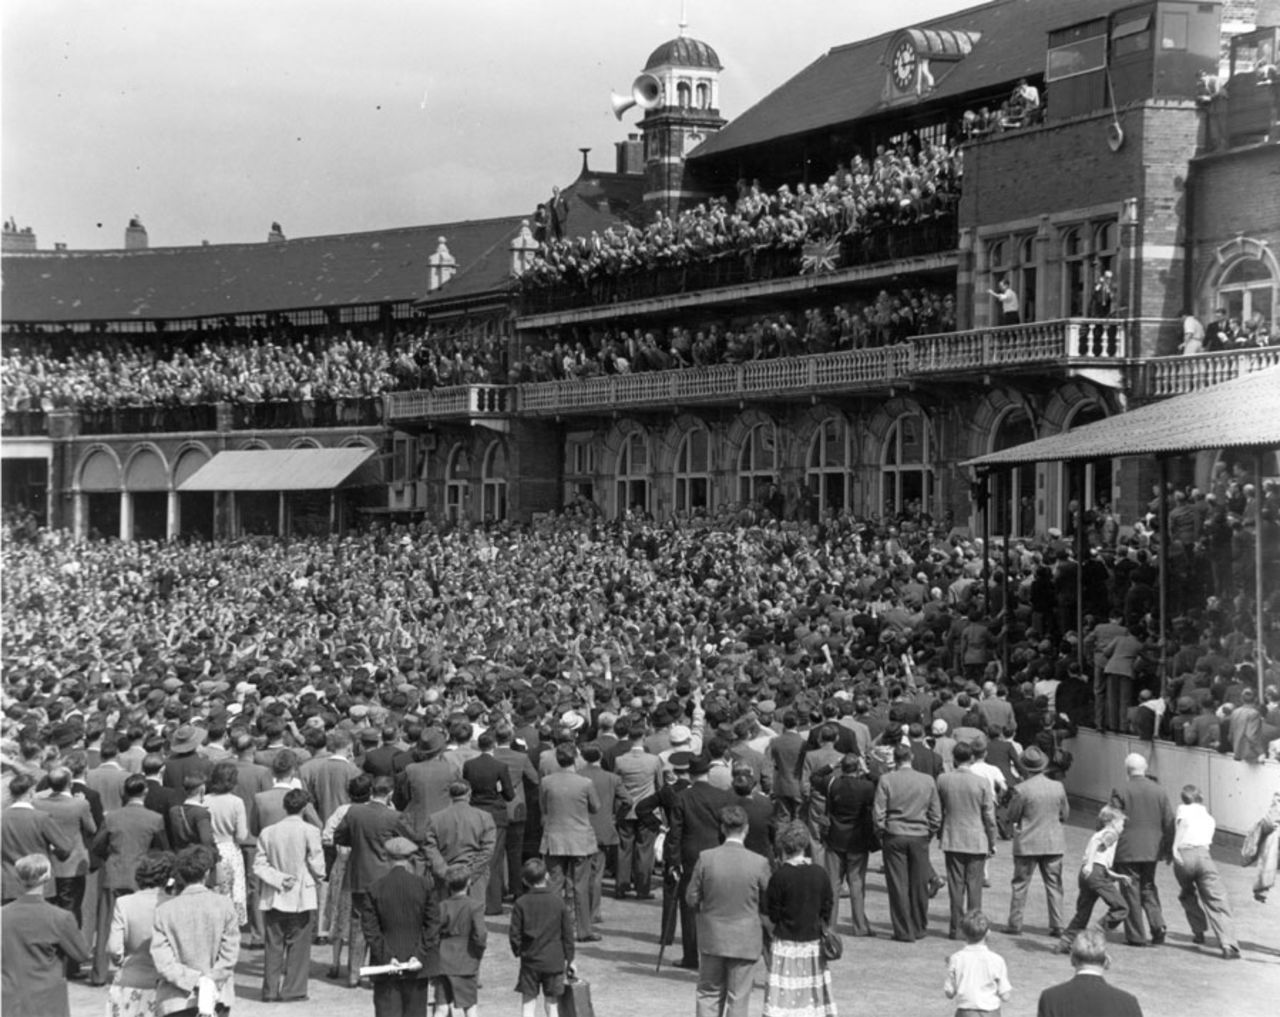 Spectators invade the pitch after England's win, England v Australia, 5th Test, The Oval, 4th day, August 19, 1953